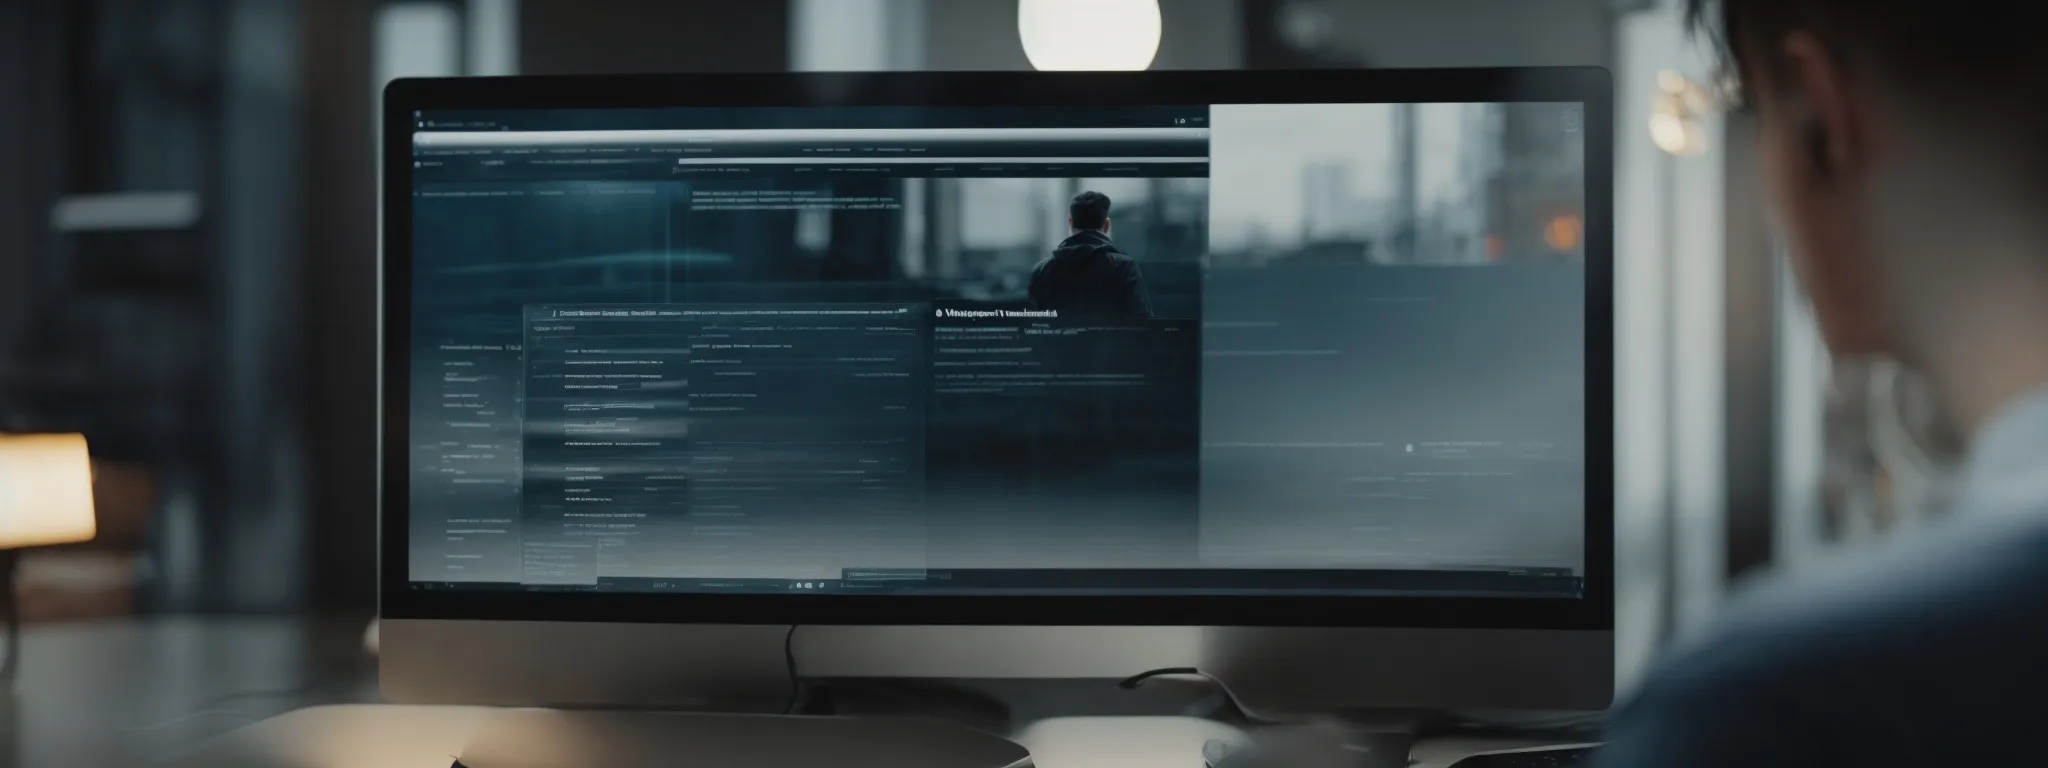 a blurred image of a person swiftly navigating through an ultra-modern, high-speed website interface on a sleek computer screen, symbolizing optimized user experience and fast site performance.